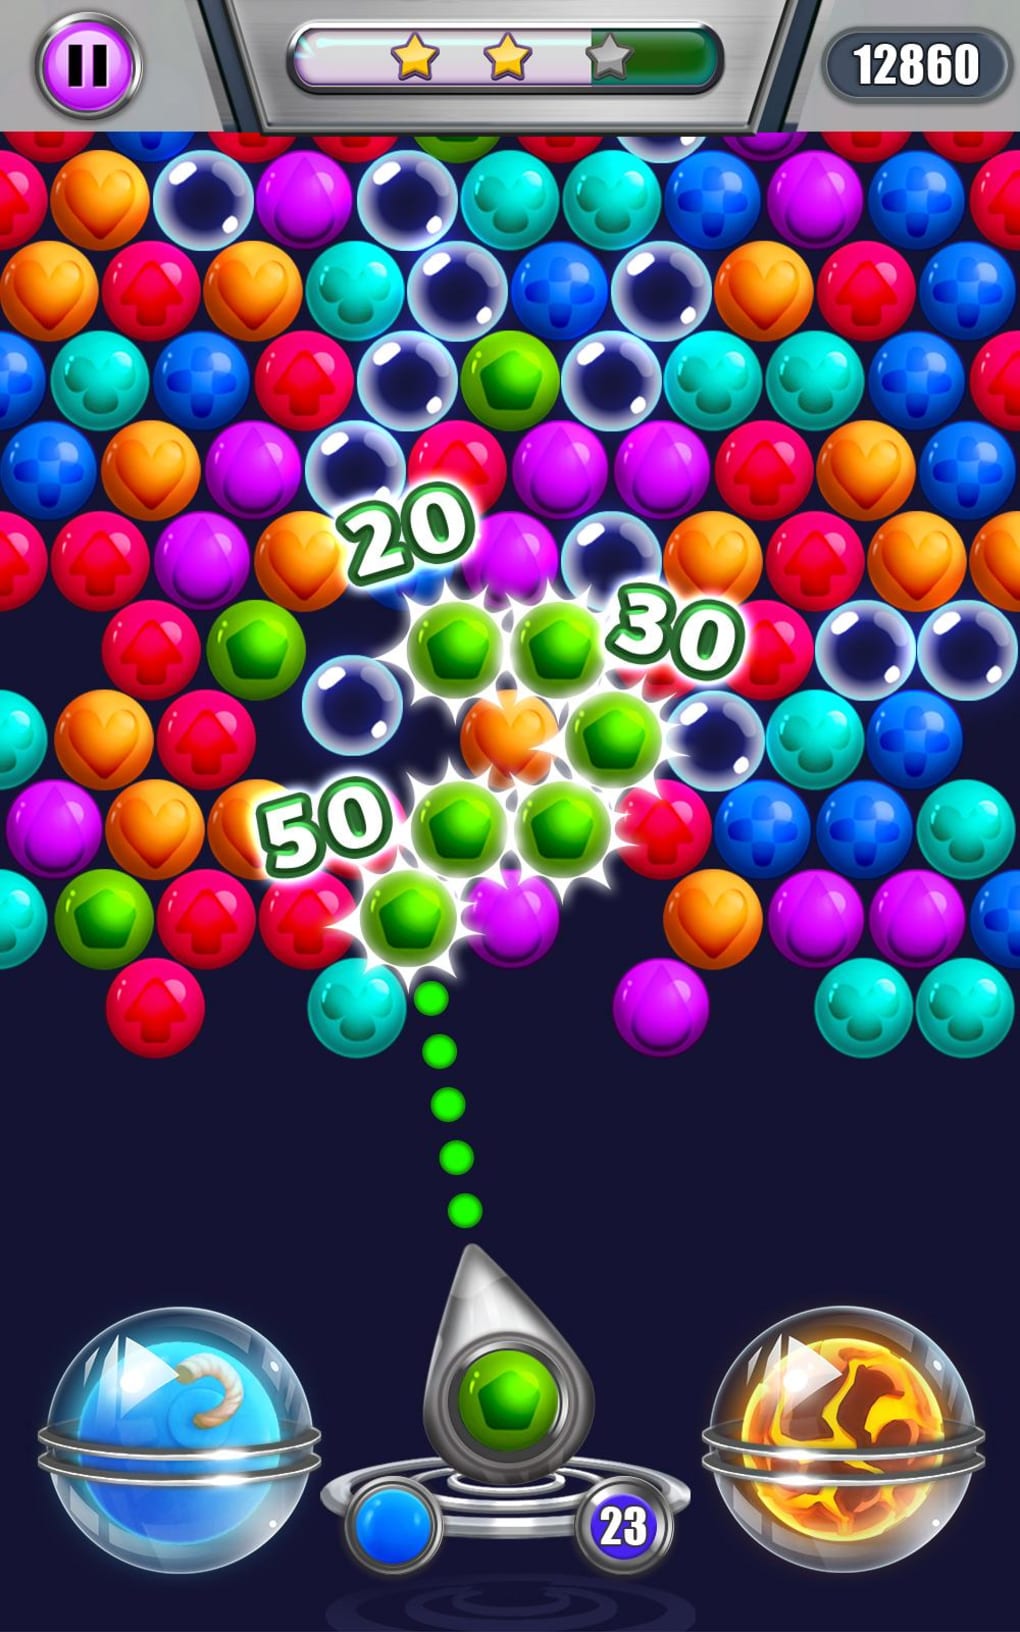 Bubble Shooter Rainbow APK for Android - Download